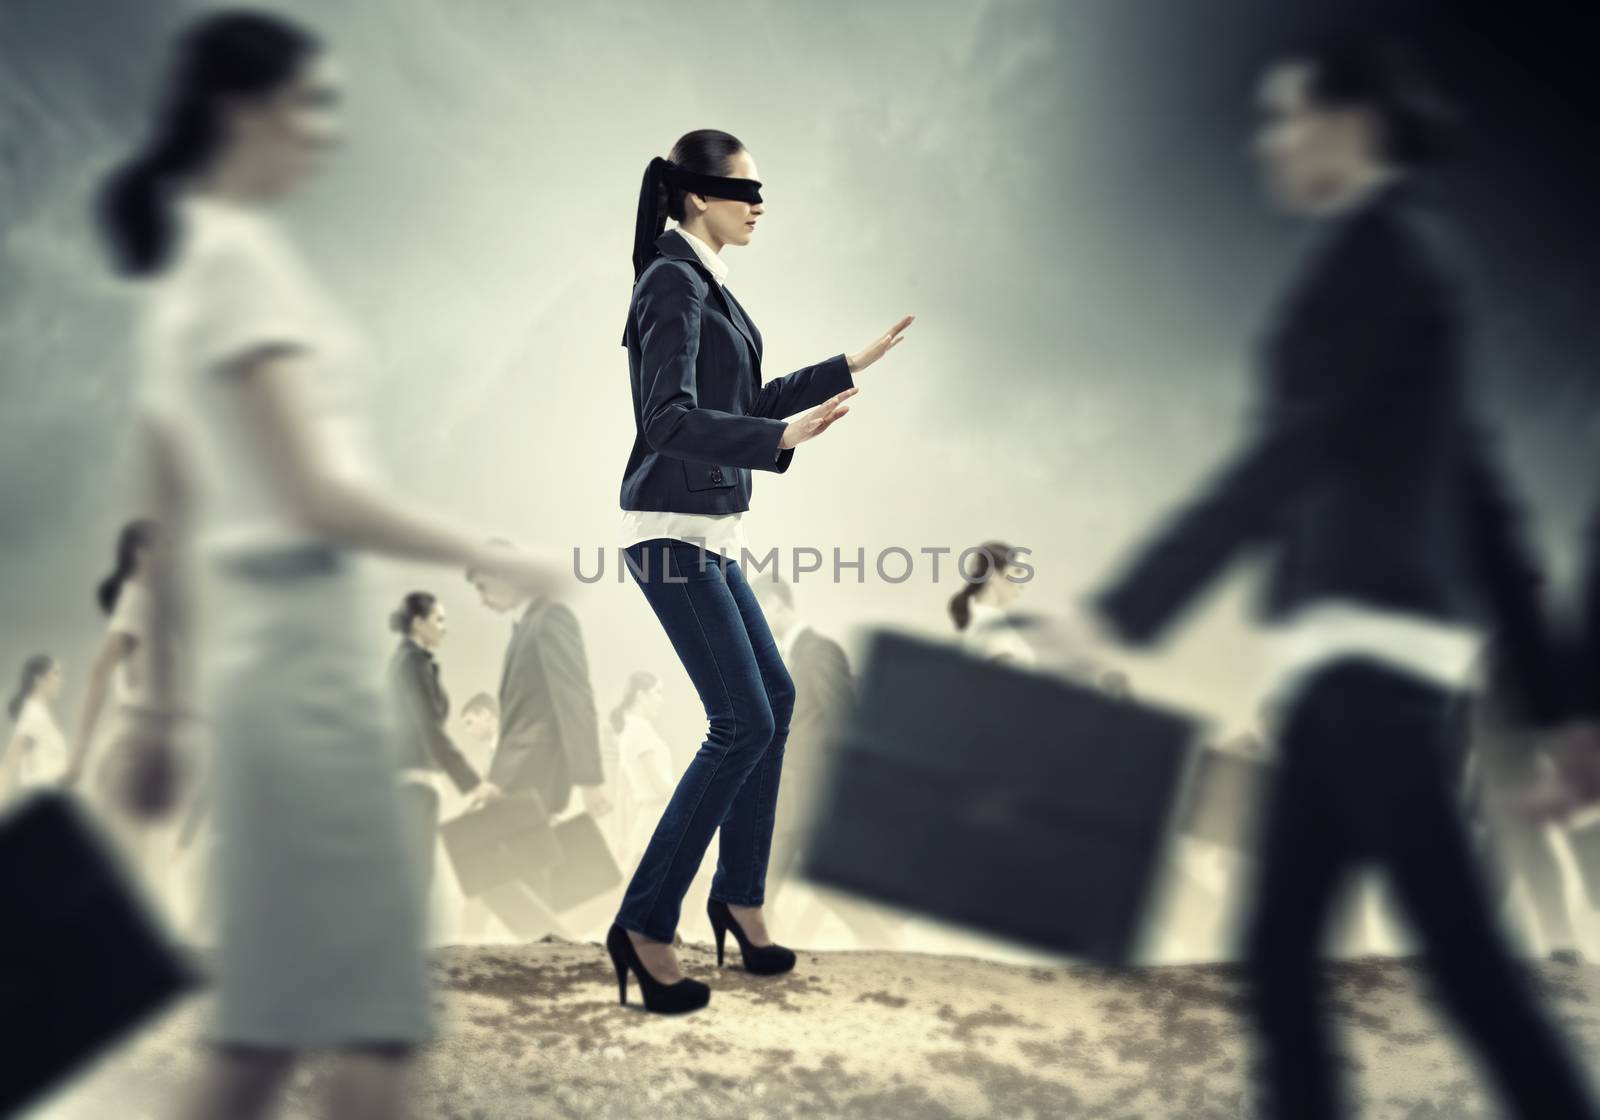 Businesswoman in blindfold among group of people by sergey_nivens